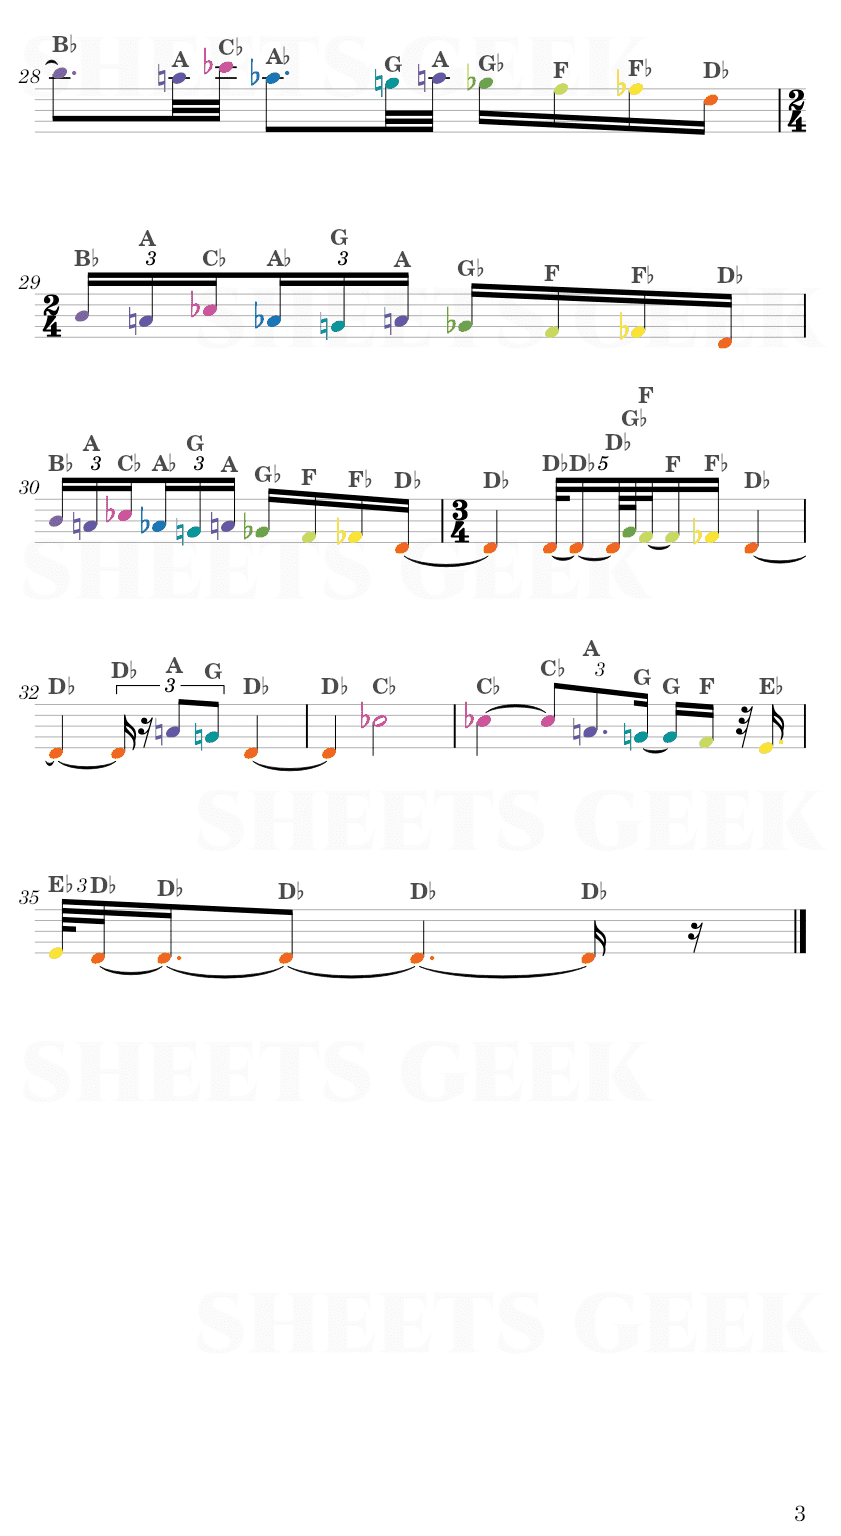 Syrinx - Claude Debussy Easy Sheets Music Free for piano, keyboard, flute, violin, sax, celllo 3